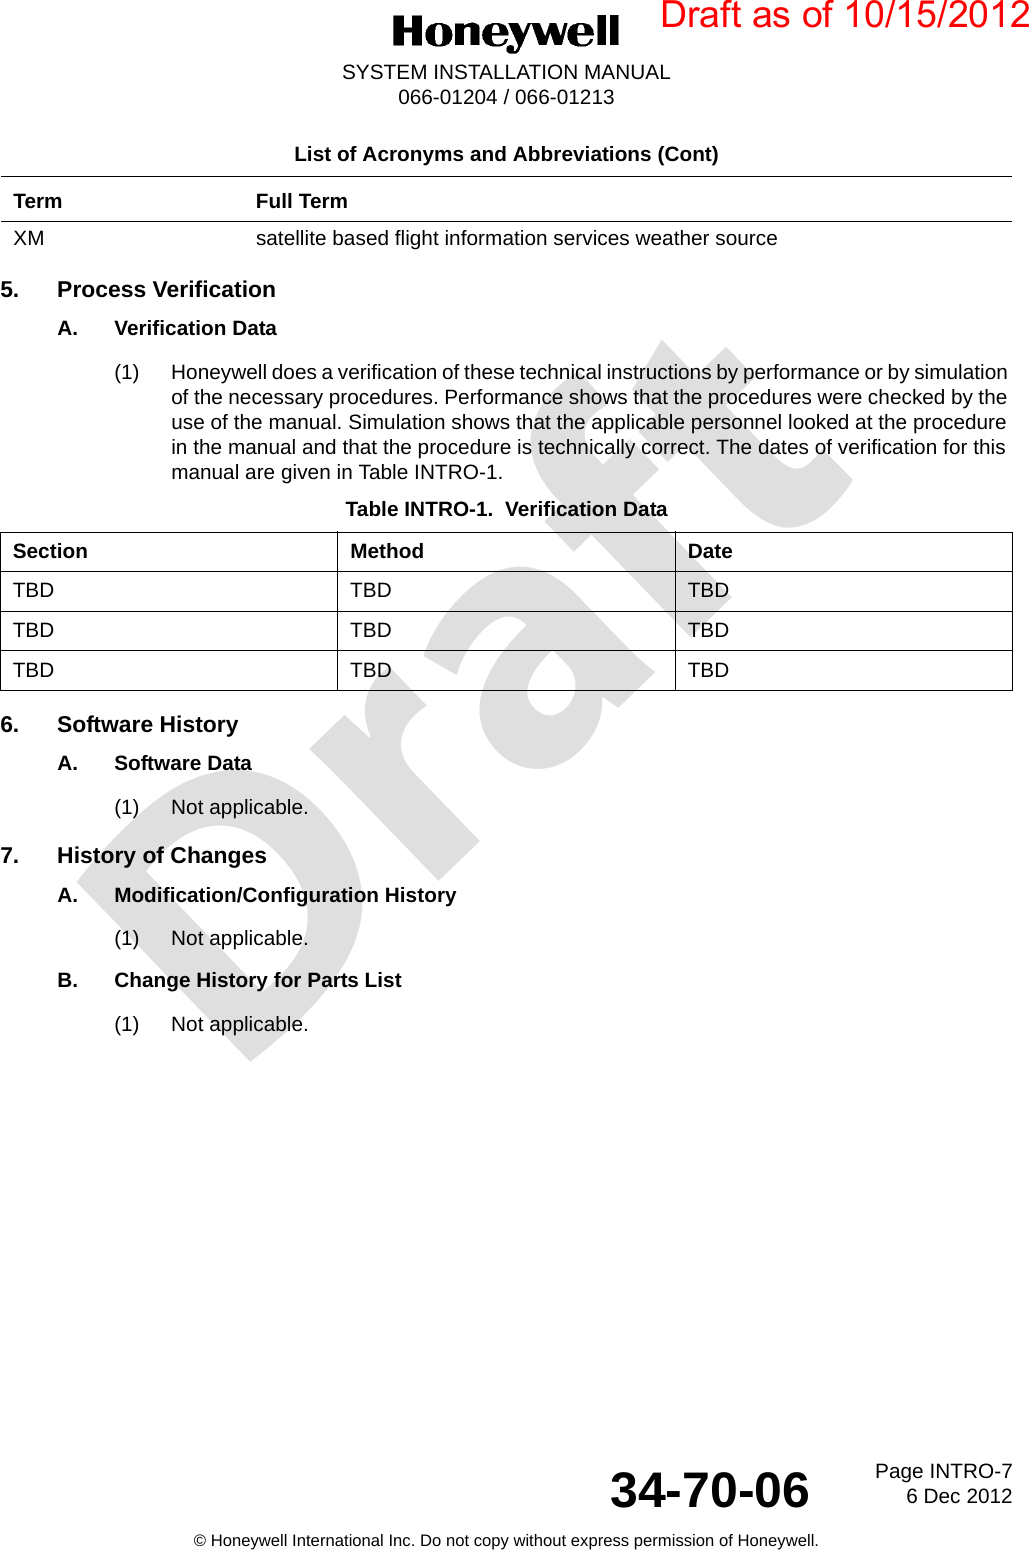 DraftPage INTRO-76 Dec 201234-70-06SYSTEM INSTALLATION MANUAL066-01204 / 066-01213© Honeywell International Inc. Do not copy without express permission of Honeywell.5. Process VerificationA. Verification Data(1) Honeywell does a verification of these technical instructions by performance or by simulation of the necessary procedures. Performance shows that the procedures were checked by the use of the manual. Simulation shows that the applicable personnel looked at the procedure in the manual and that the procedure is technically correct. The dates of verification for this manual are given in Table INTRO-1.6. Software HistoryA. Software Data(1) Not applicable.7. History of ChangesA. Modification/Configuration History(1) Not applicable.B. Change History for Parts List(1) Not applicable.XM satellite based flight information services weather sourceTable INTRO-1.  Verification DataSection Method DateTBD TBD TBDTBD TBD TBDTBD TBD TBDList of Acronyms and Abbreviations (Cont)Term Full TermDraft as of 10/15/2012